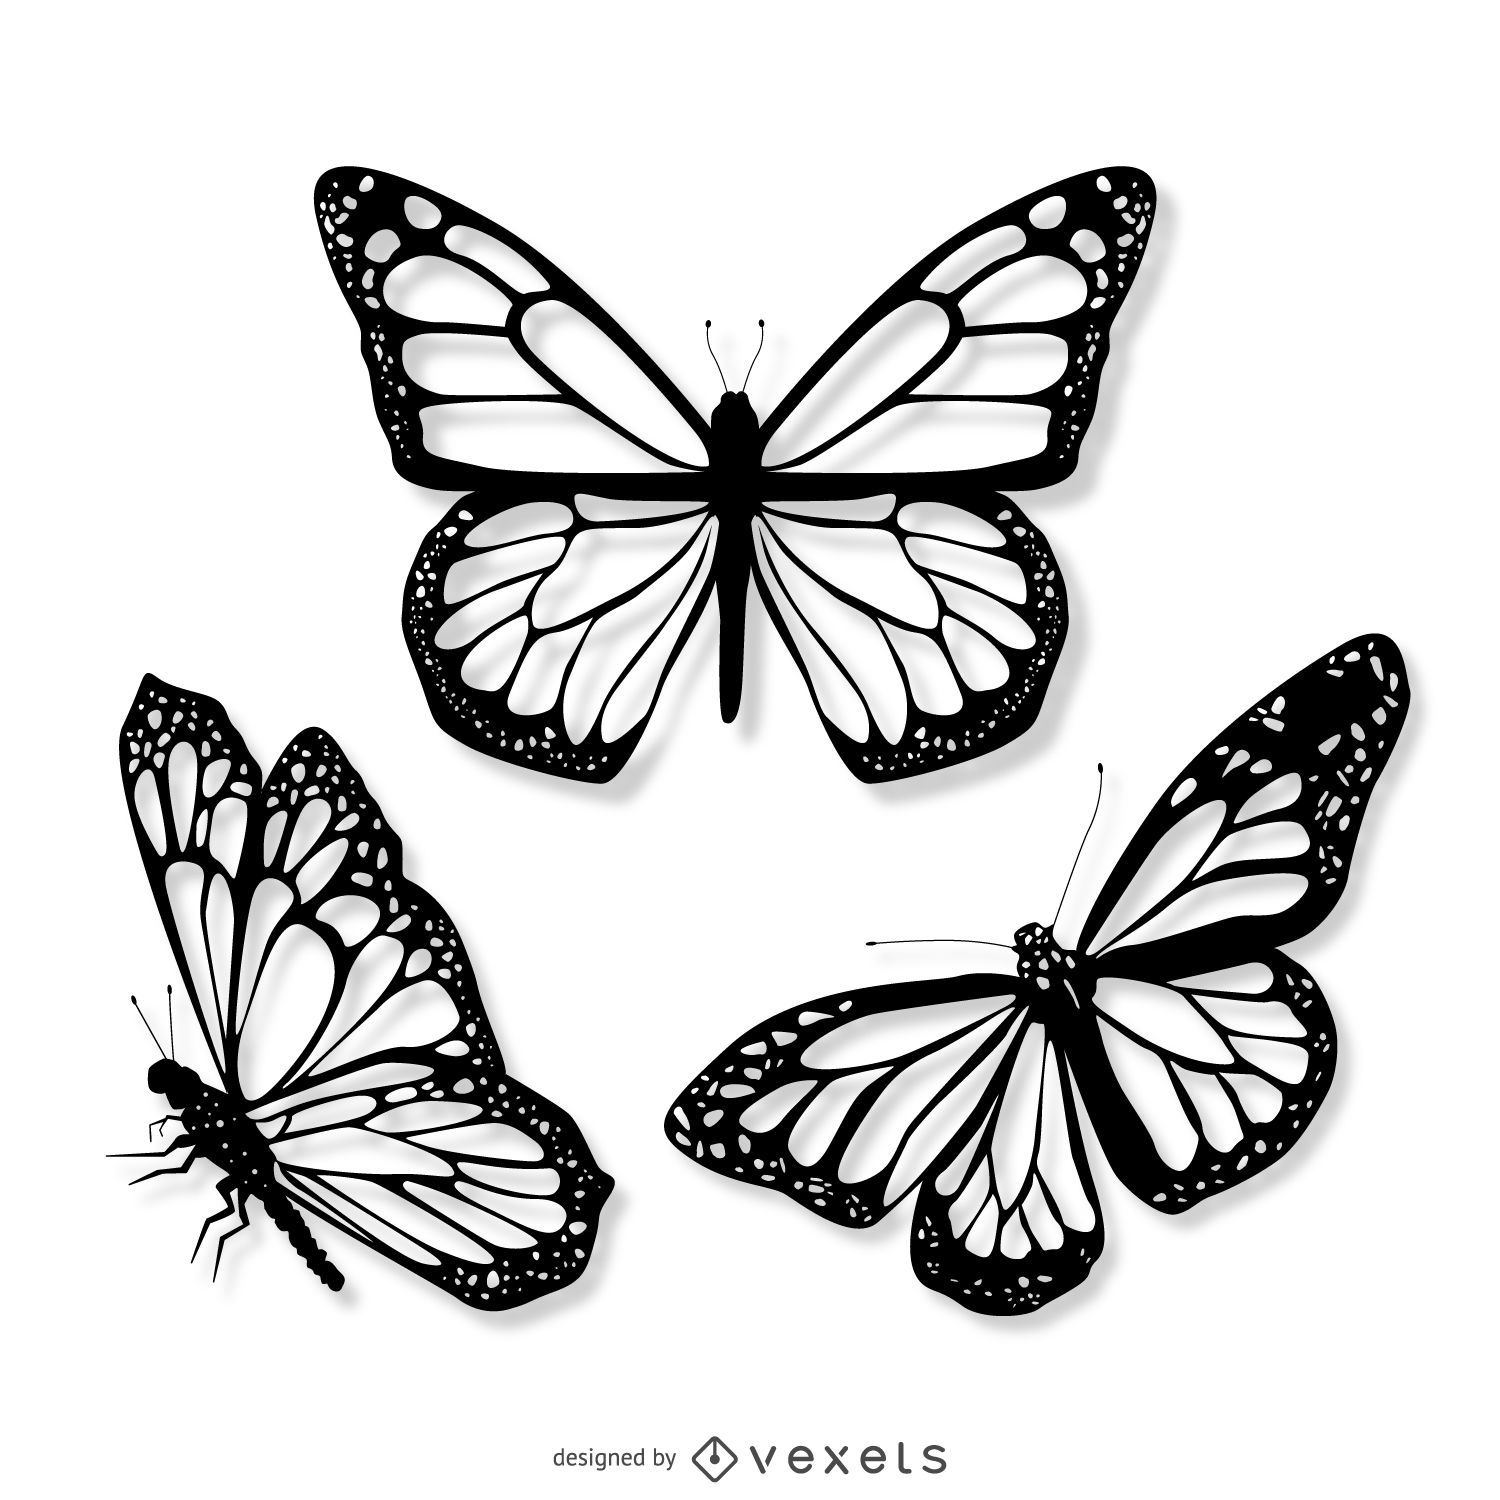 3 realistic butterfly illustration set